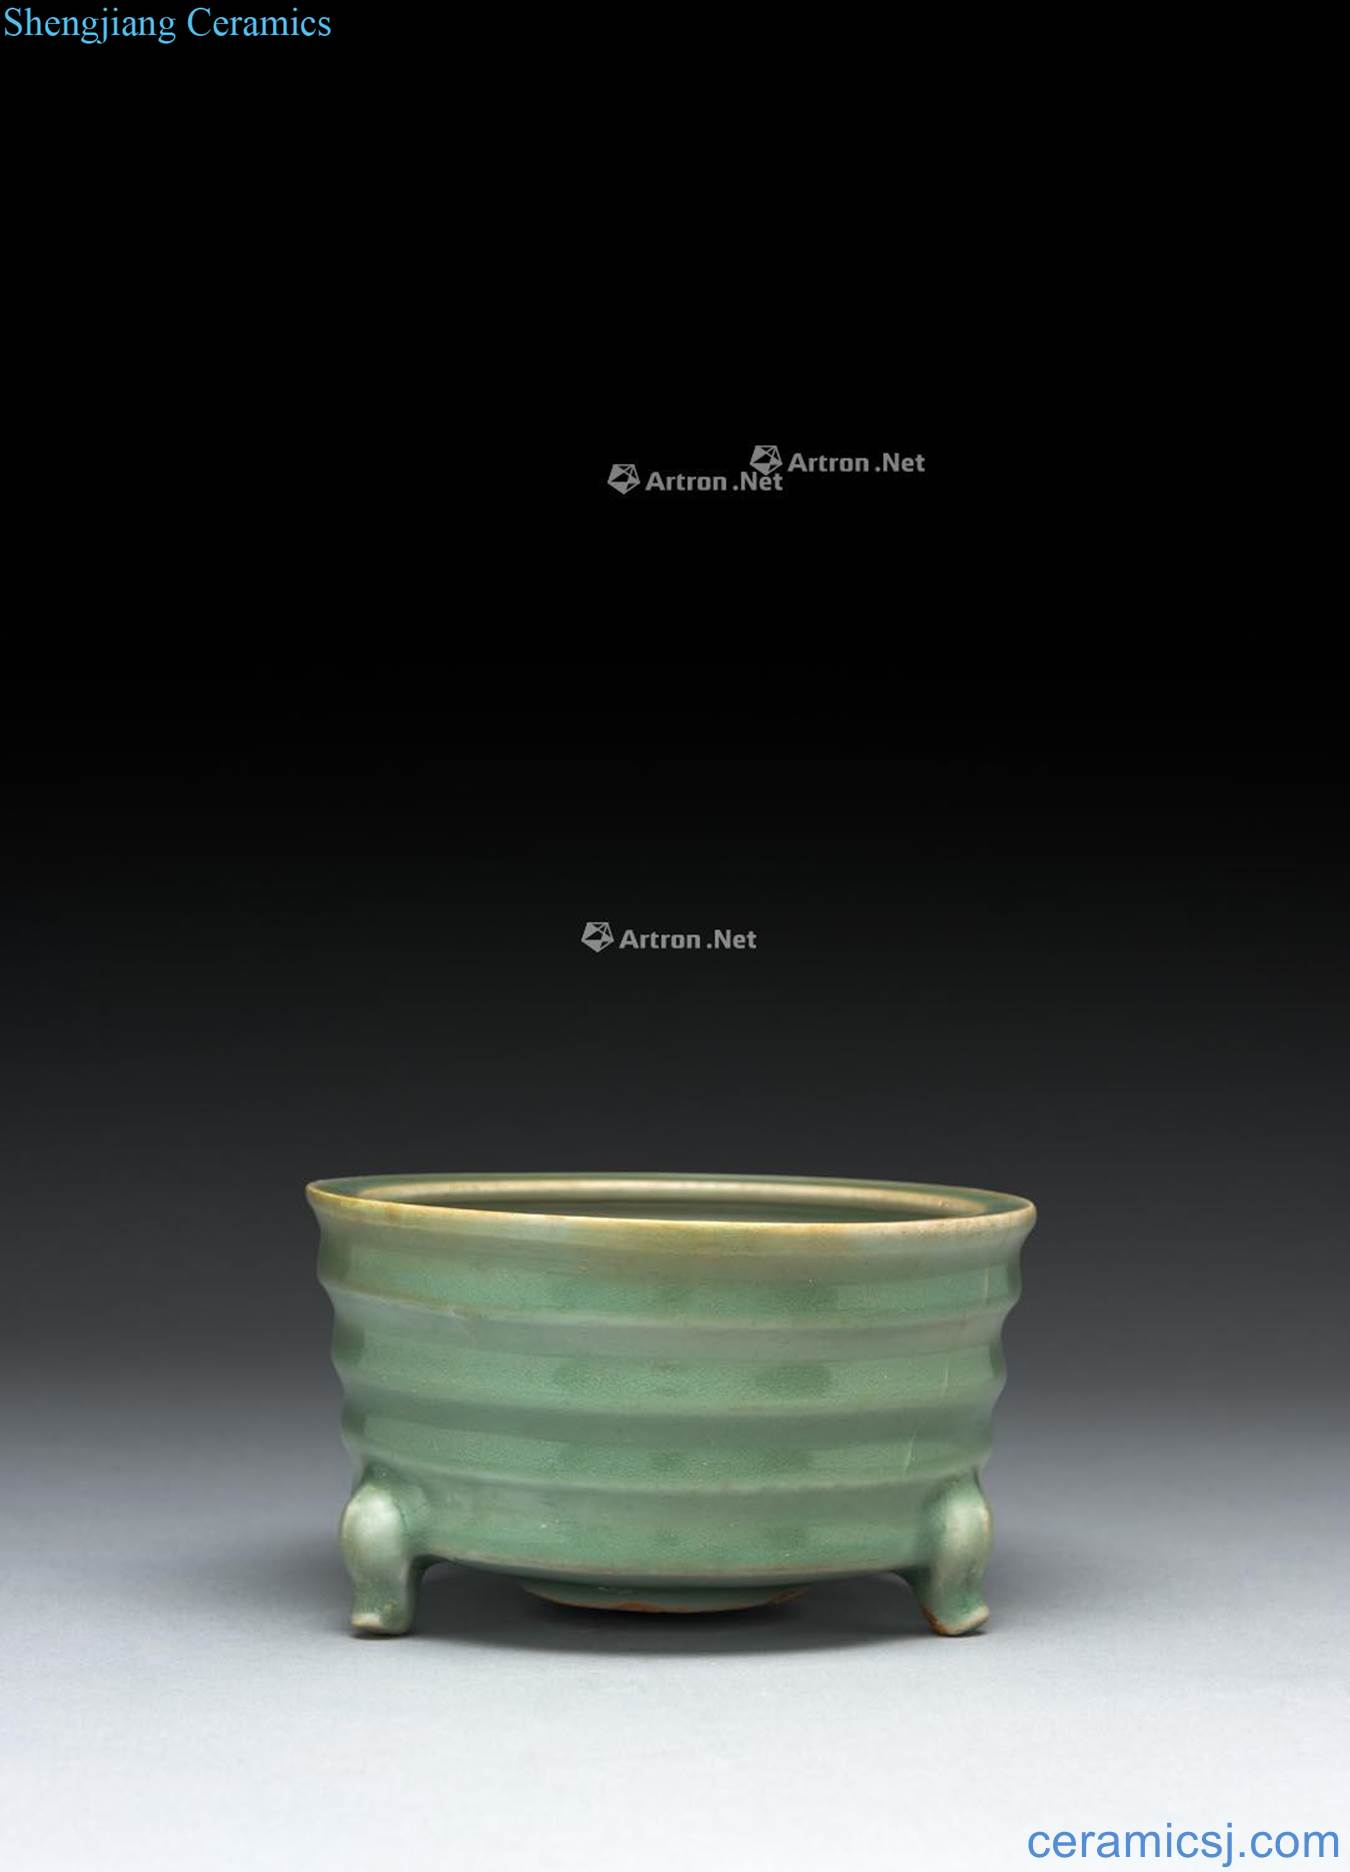 And the early yuan dynasty The 13th to the 14th century Longquan celadon furnace with three legs